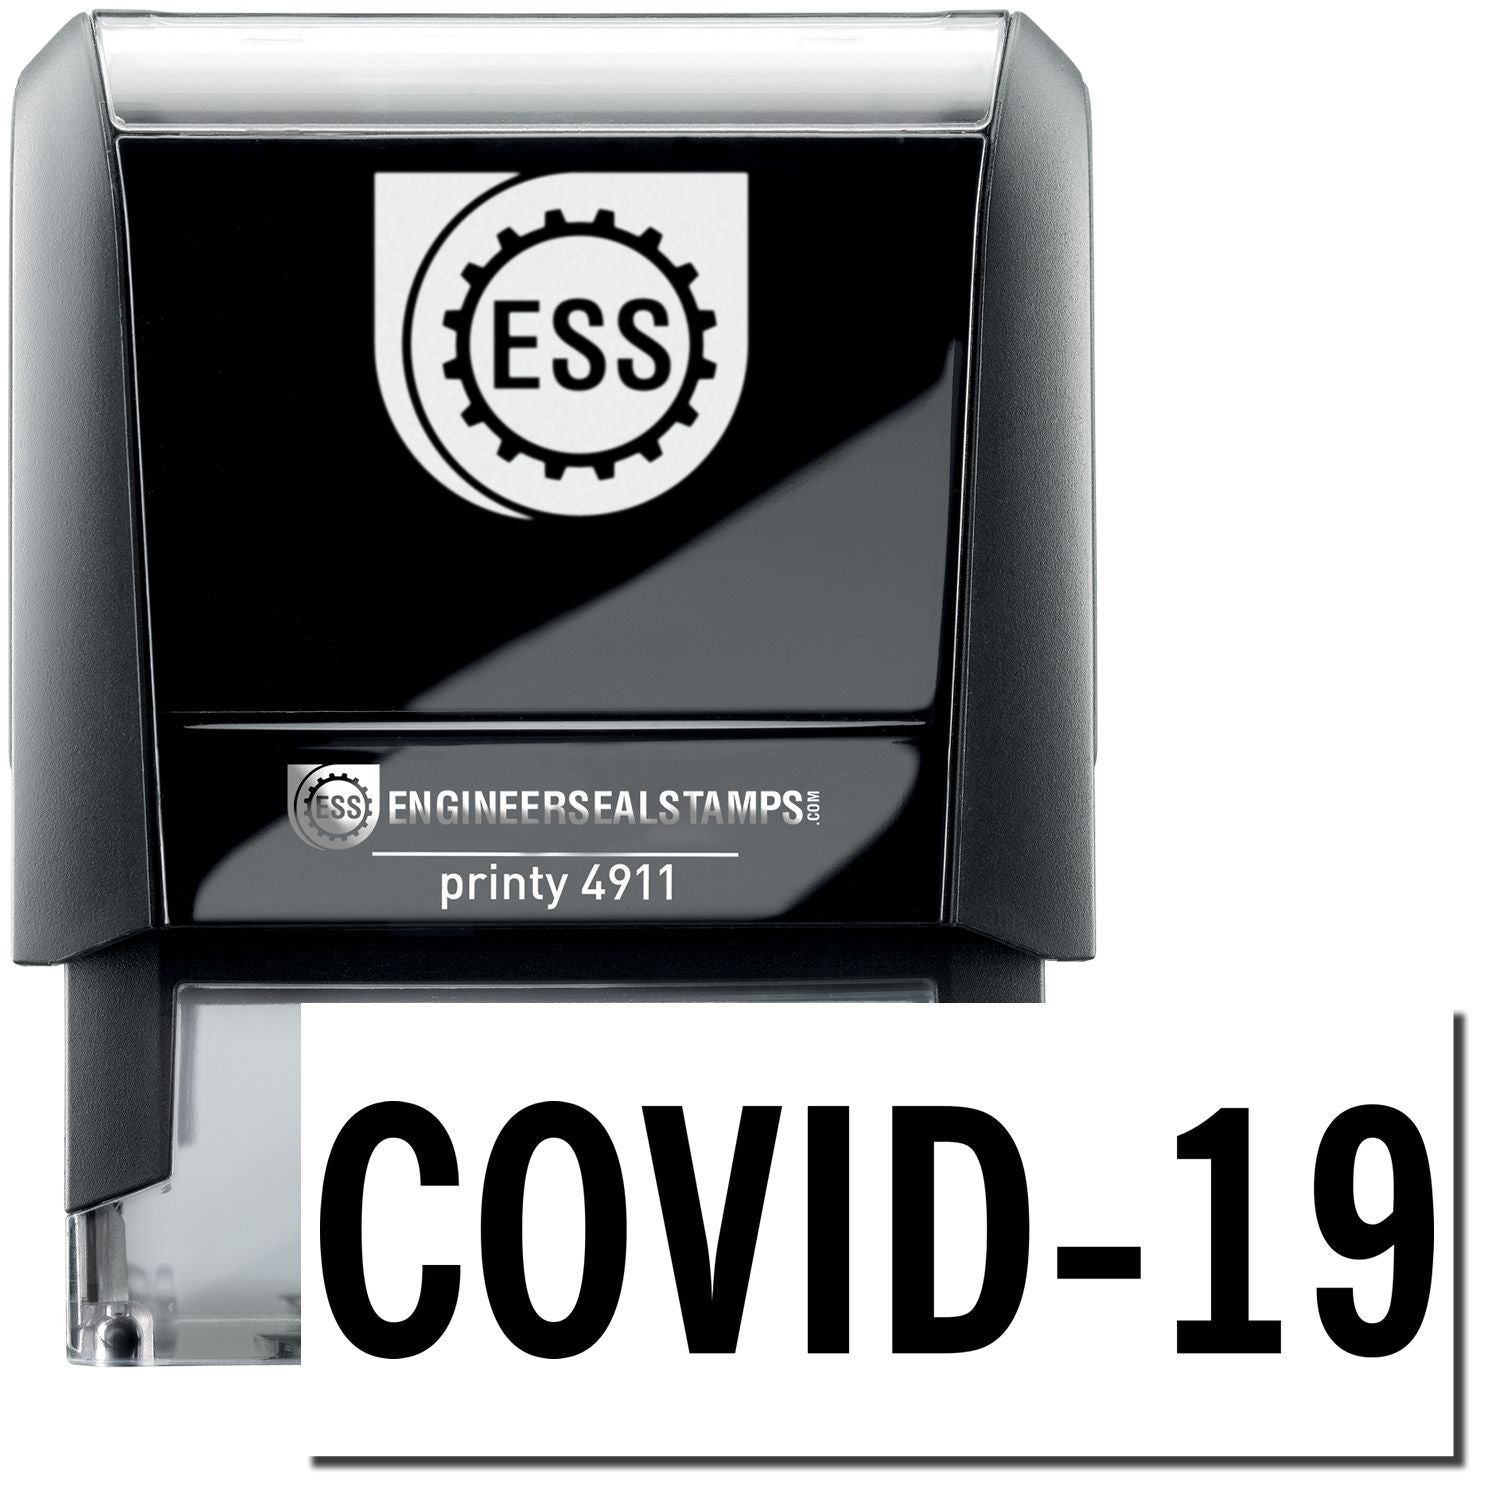 A self-inking stamp with a stamped image showing how the text "COVID-19" in bold font is displayed after stamping.